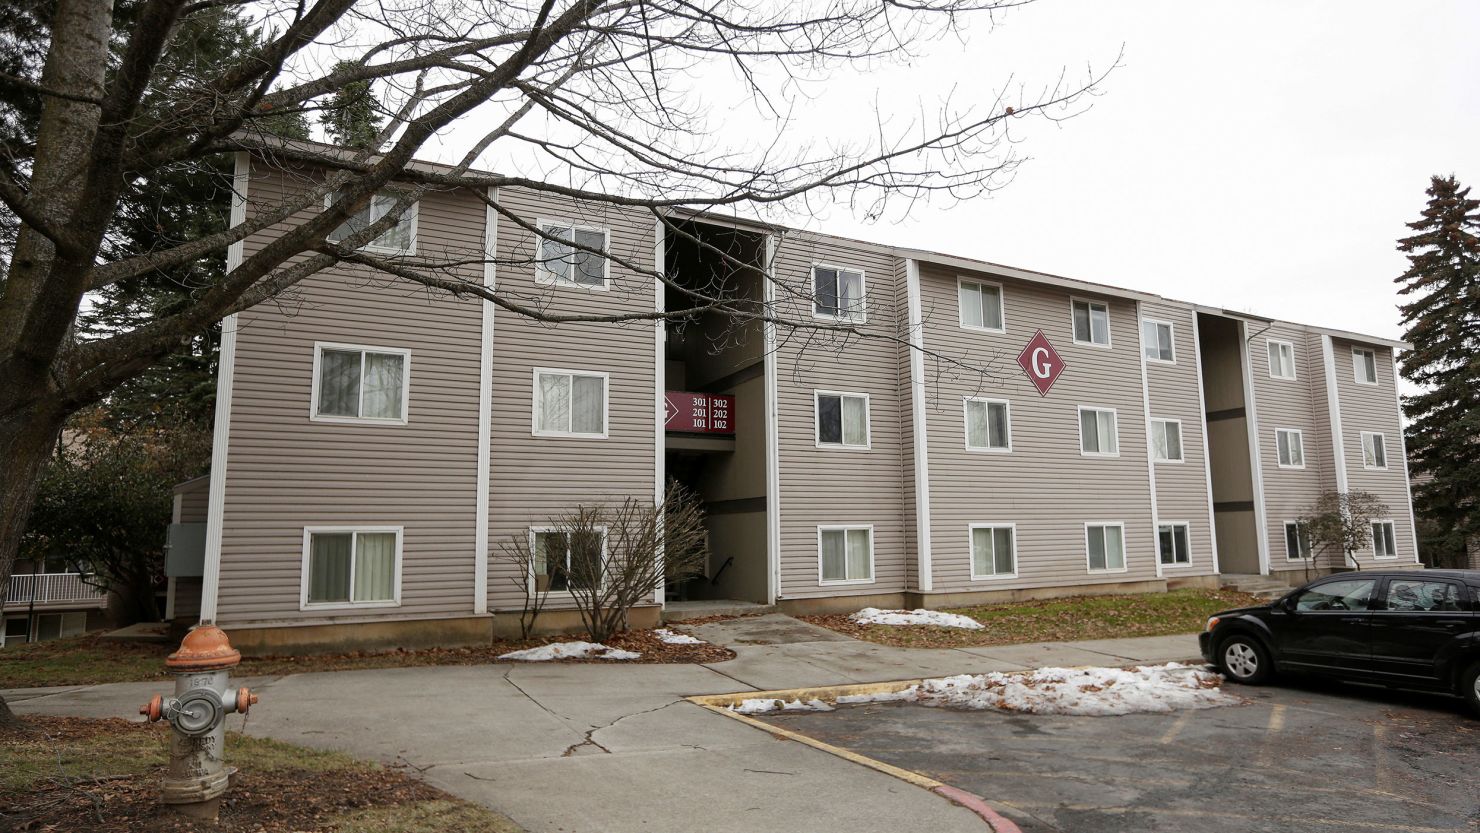 The Steptoe Village at Washington State University, where Bryan Kohberger, the graduate student accused of first-degree murder in the stabbing deaths of four  Idaho college students, rented an apartment.